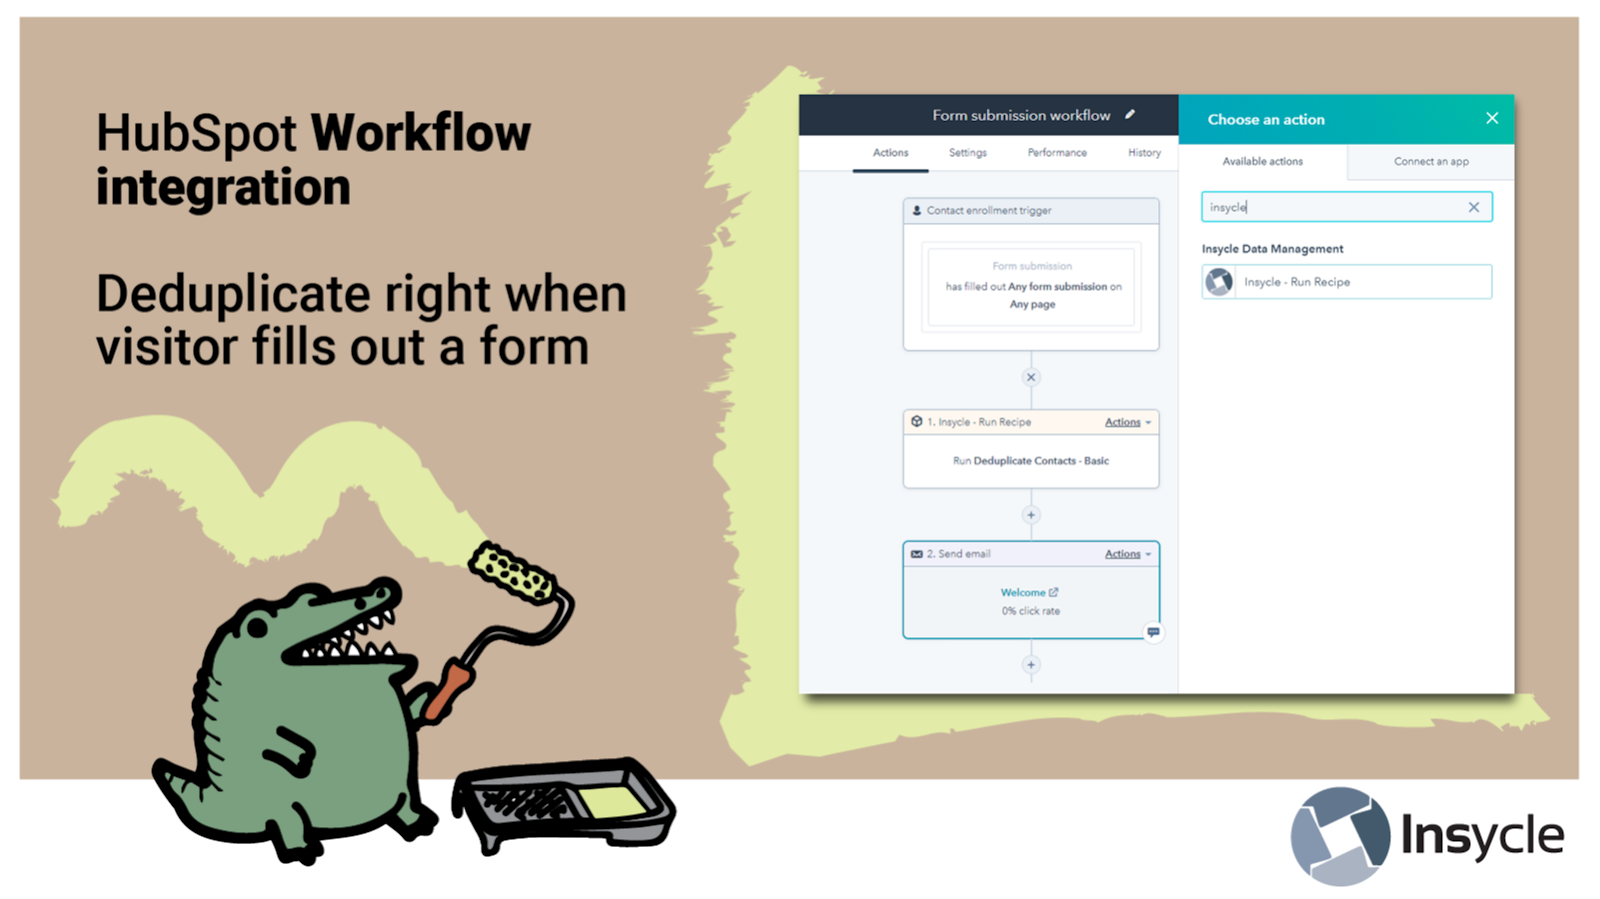 Integrate Insycle with HubSpot Workflows for automation